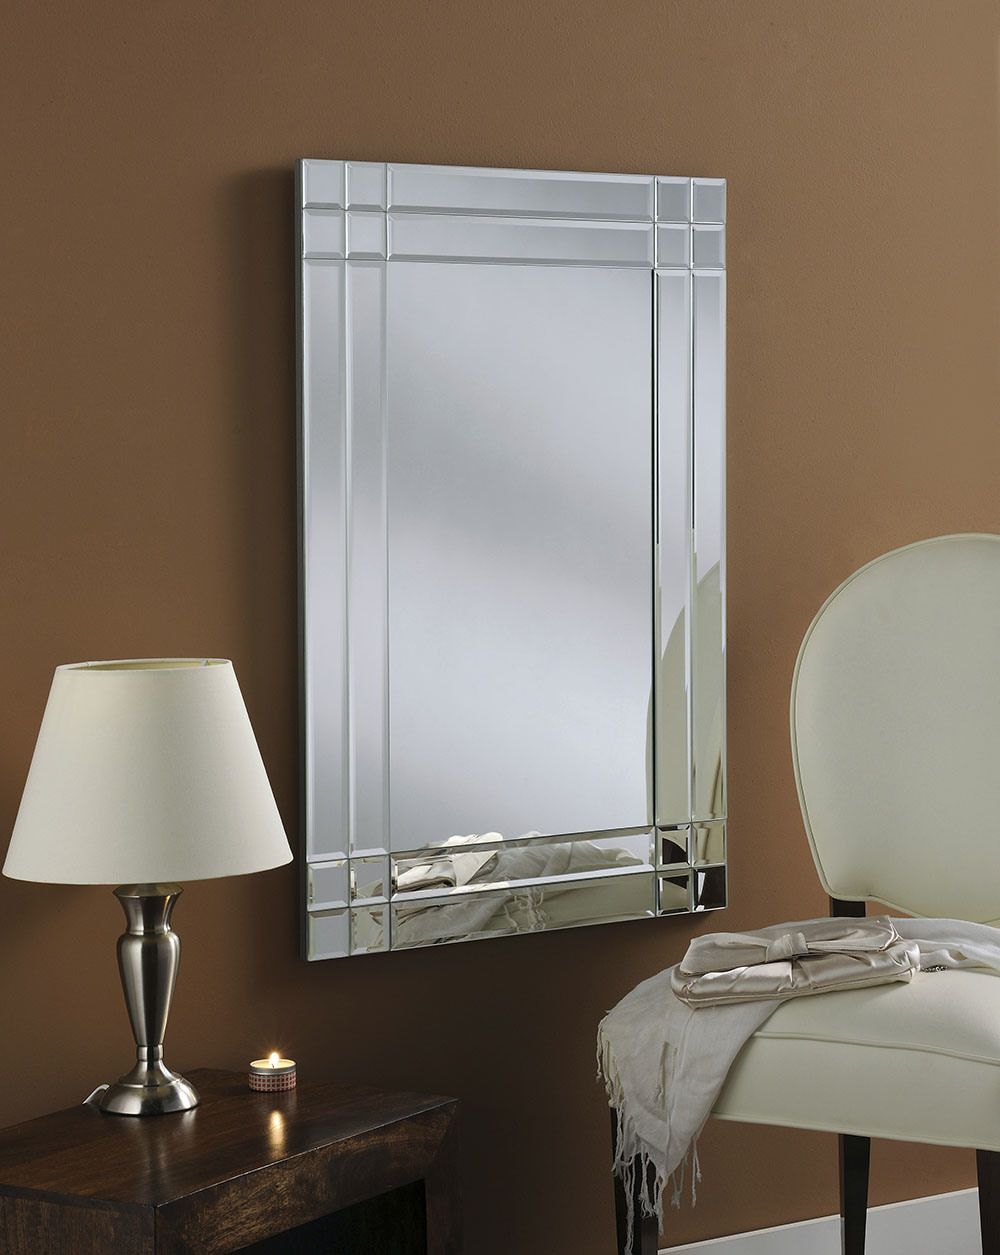 China Vanity Sheffield Home Decorative Modern Wall Mirror – China Within Loftis Modern &amp; Contemporary Accent Wall Mirrors (Photo 4 of 15)